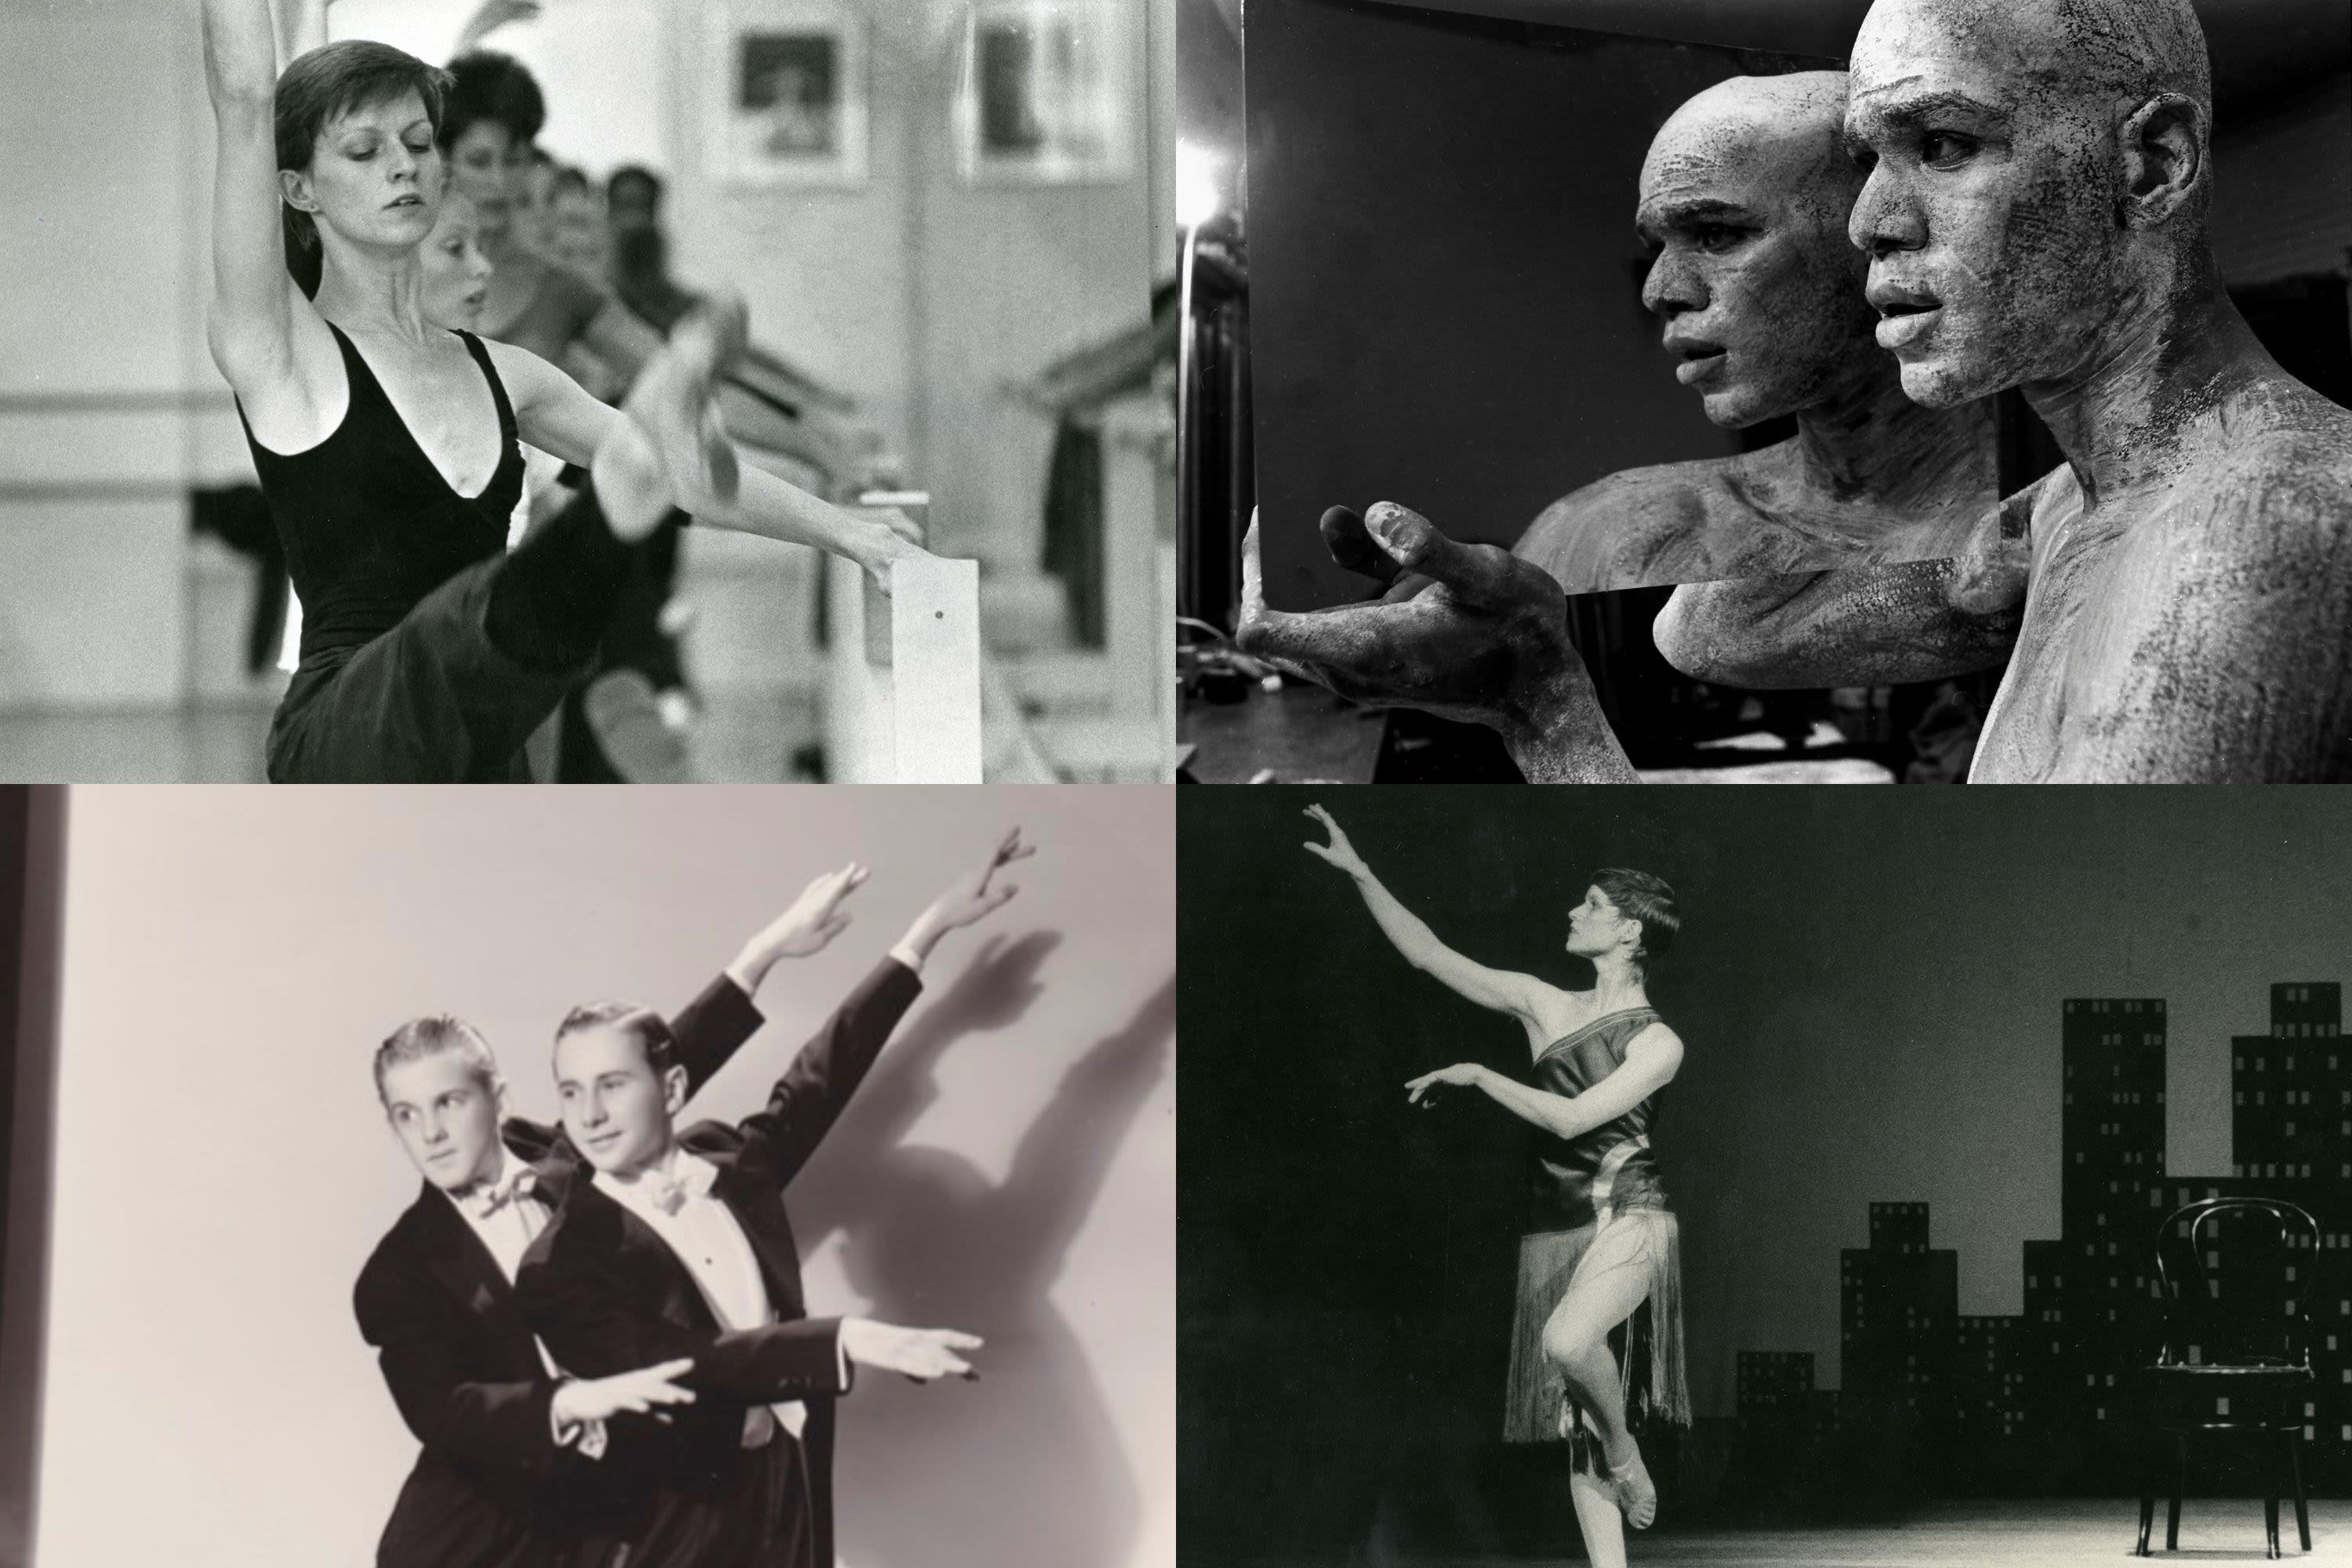 Chicago's contributions to American dance have not been fully understood, until now